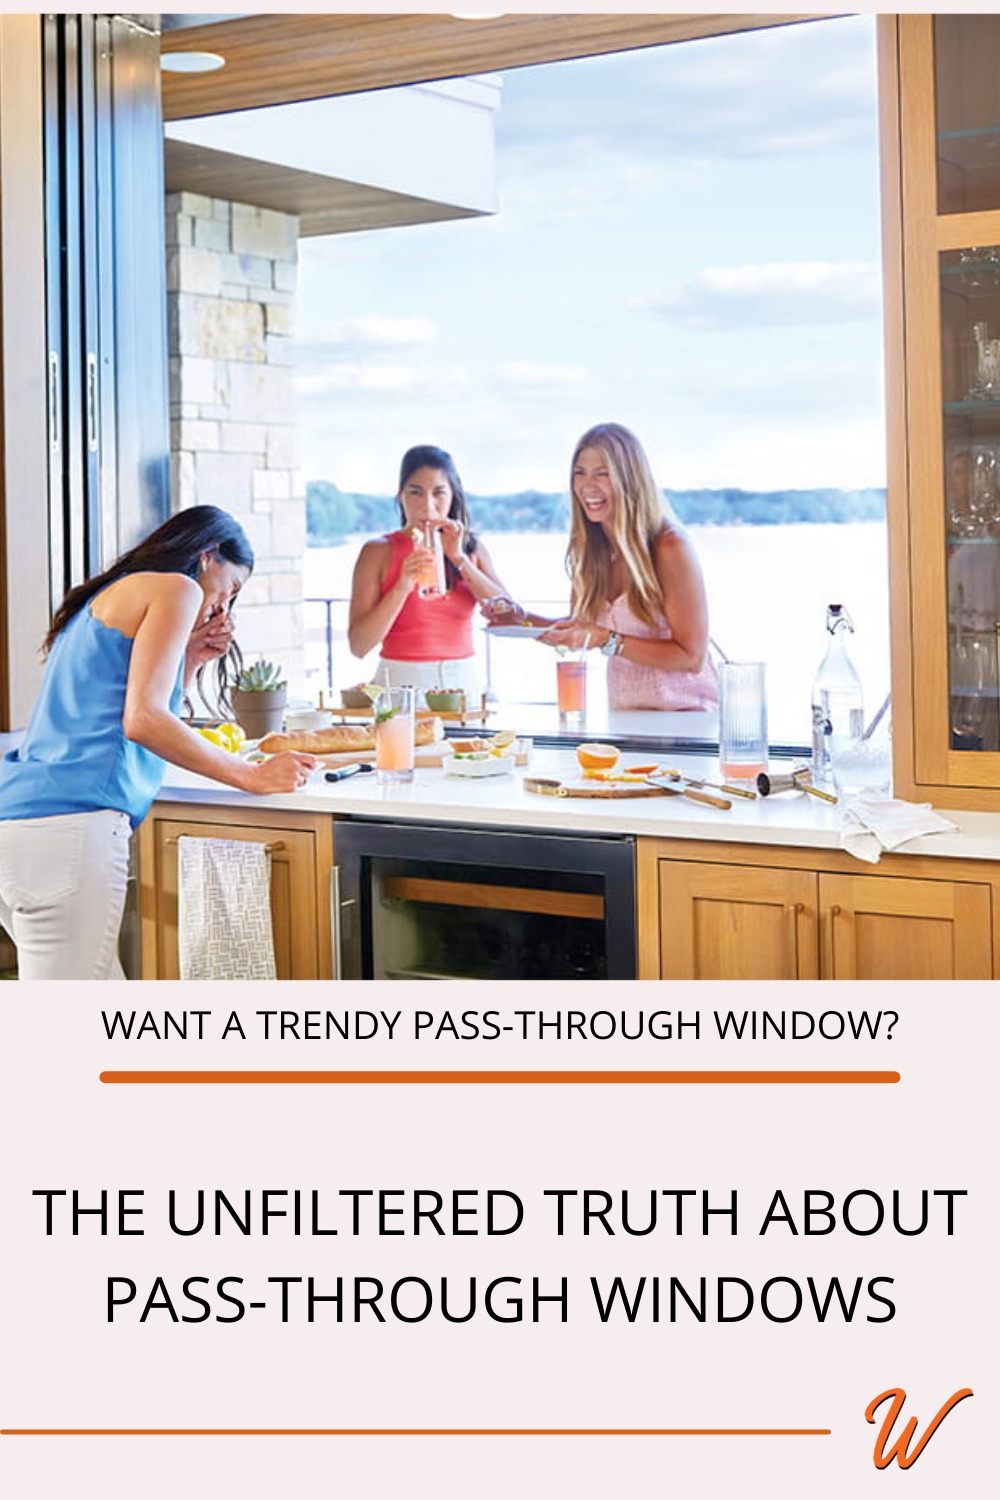 three women having brunch in indoor-outdoor living space created by a pass-through window captioned with "Want a trendy pass-through window? The unfiltered truth about pass-through windows."